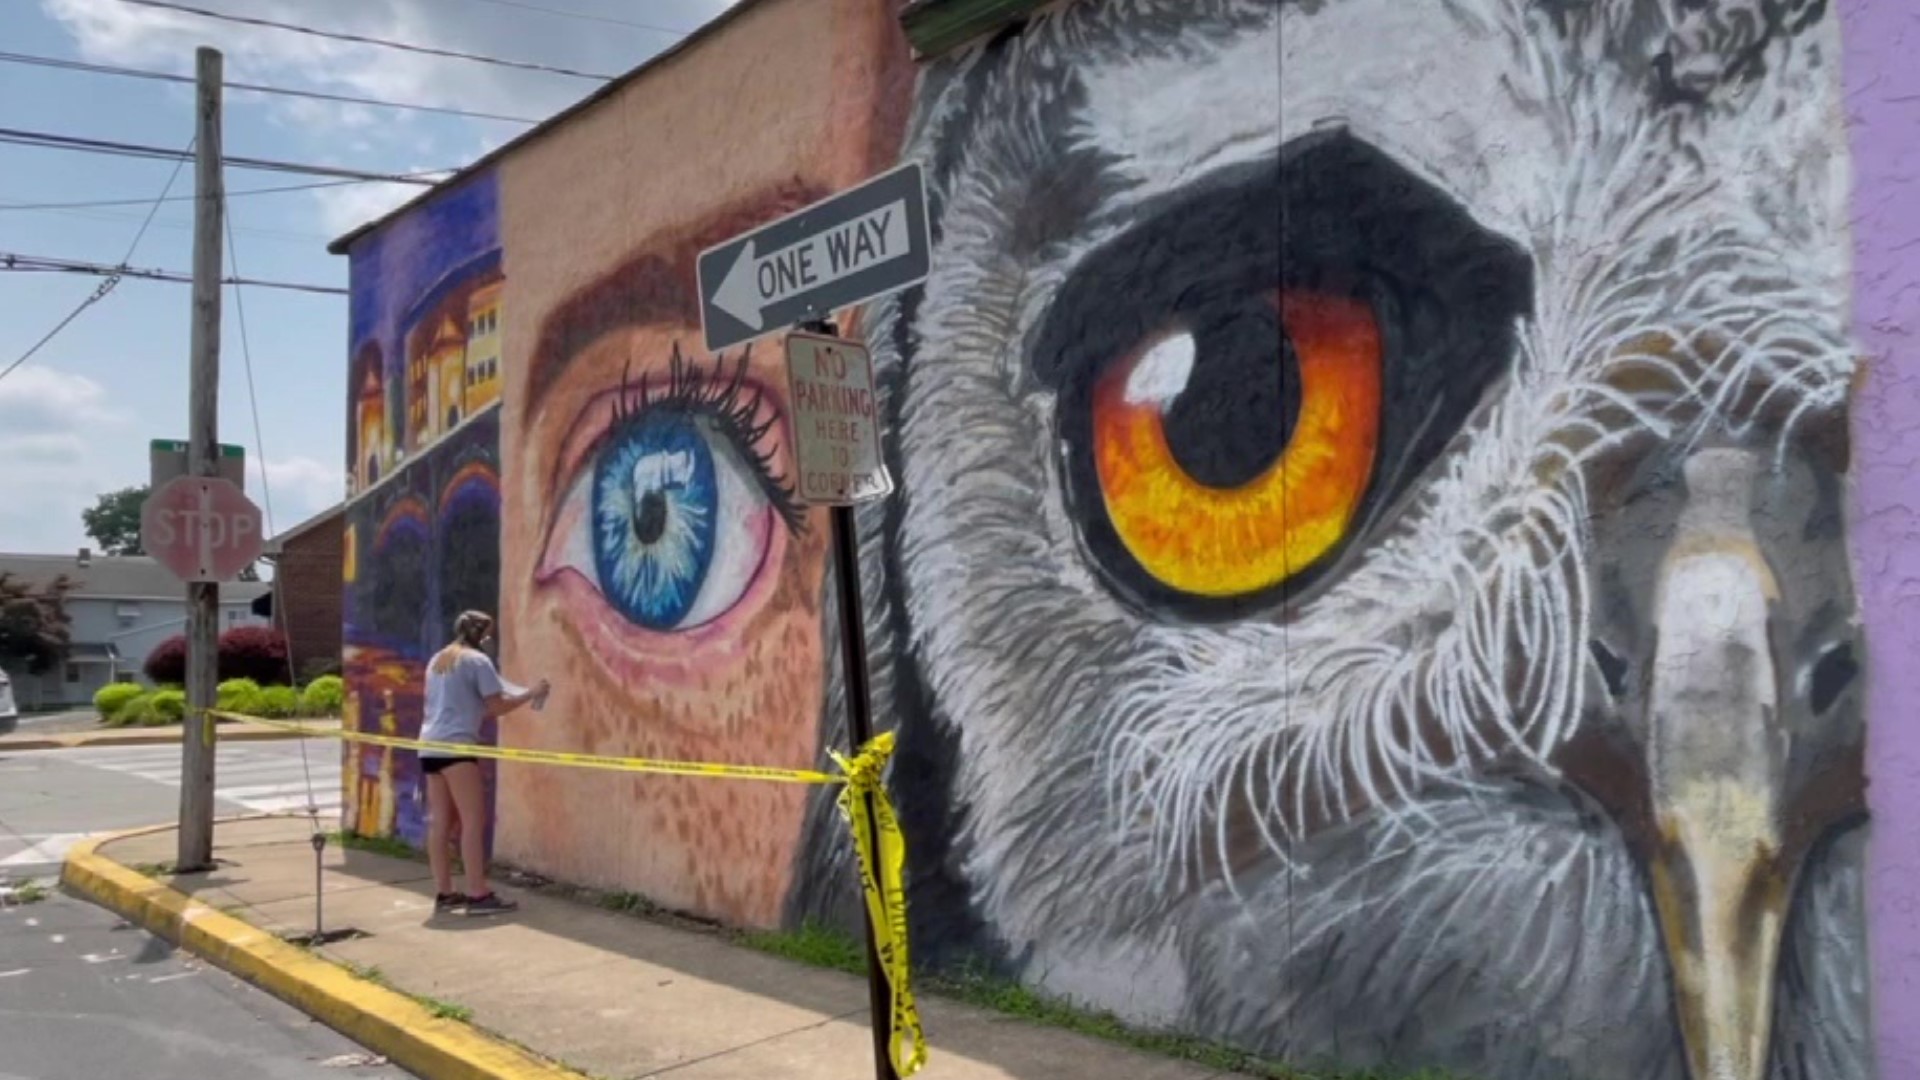 19-year-old Morgan Masters of Harveys Lake is nearly finished with a new street art piece on Walnut Street.